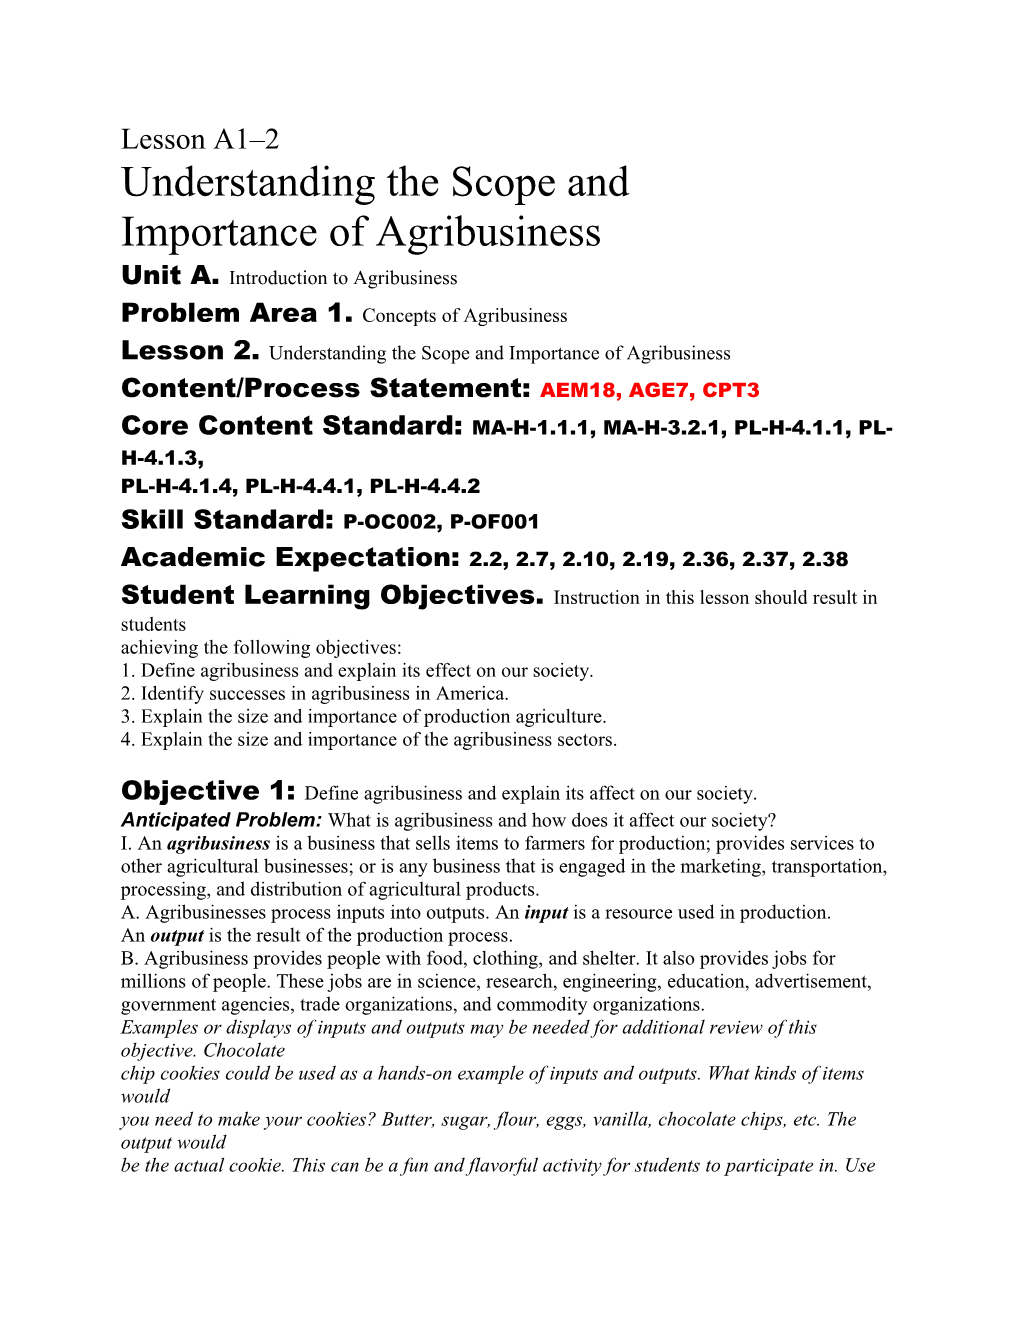 Understanding the Scope And